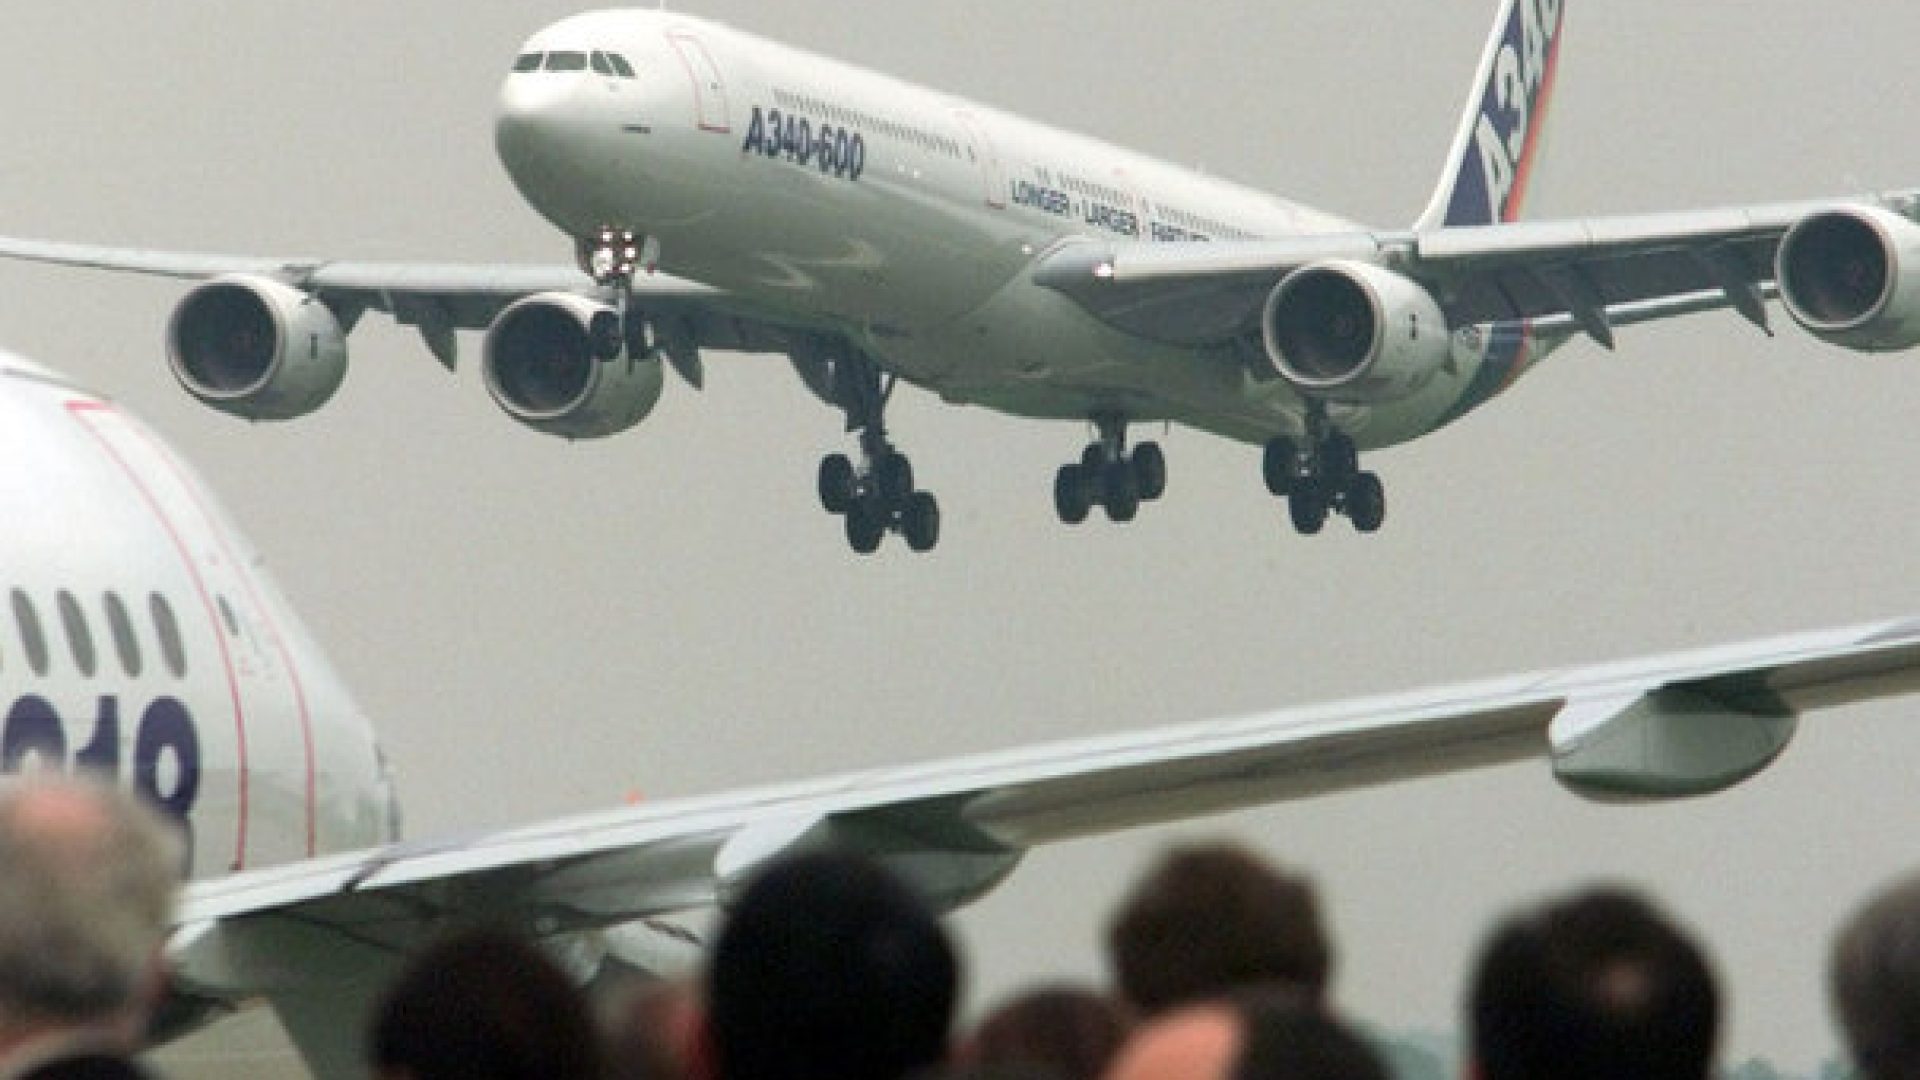 Airbus Industries A 340-600 plane flies next to an A-318 aircraft during a presentation at the Inter..